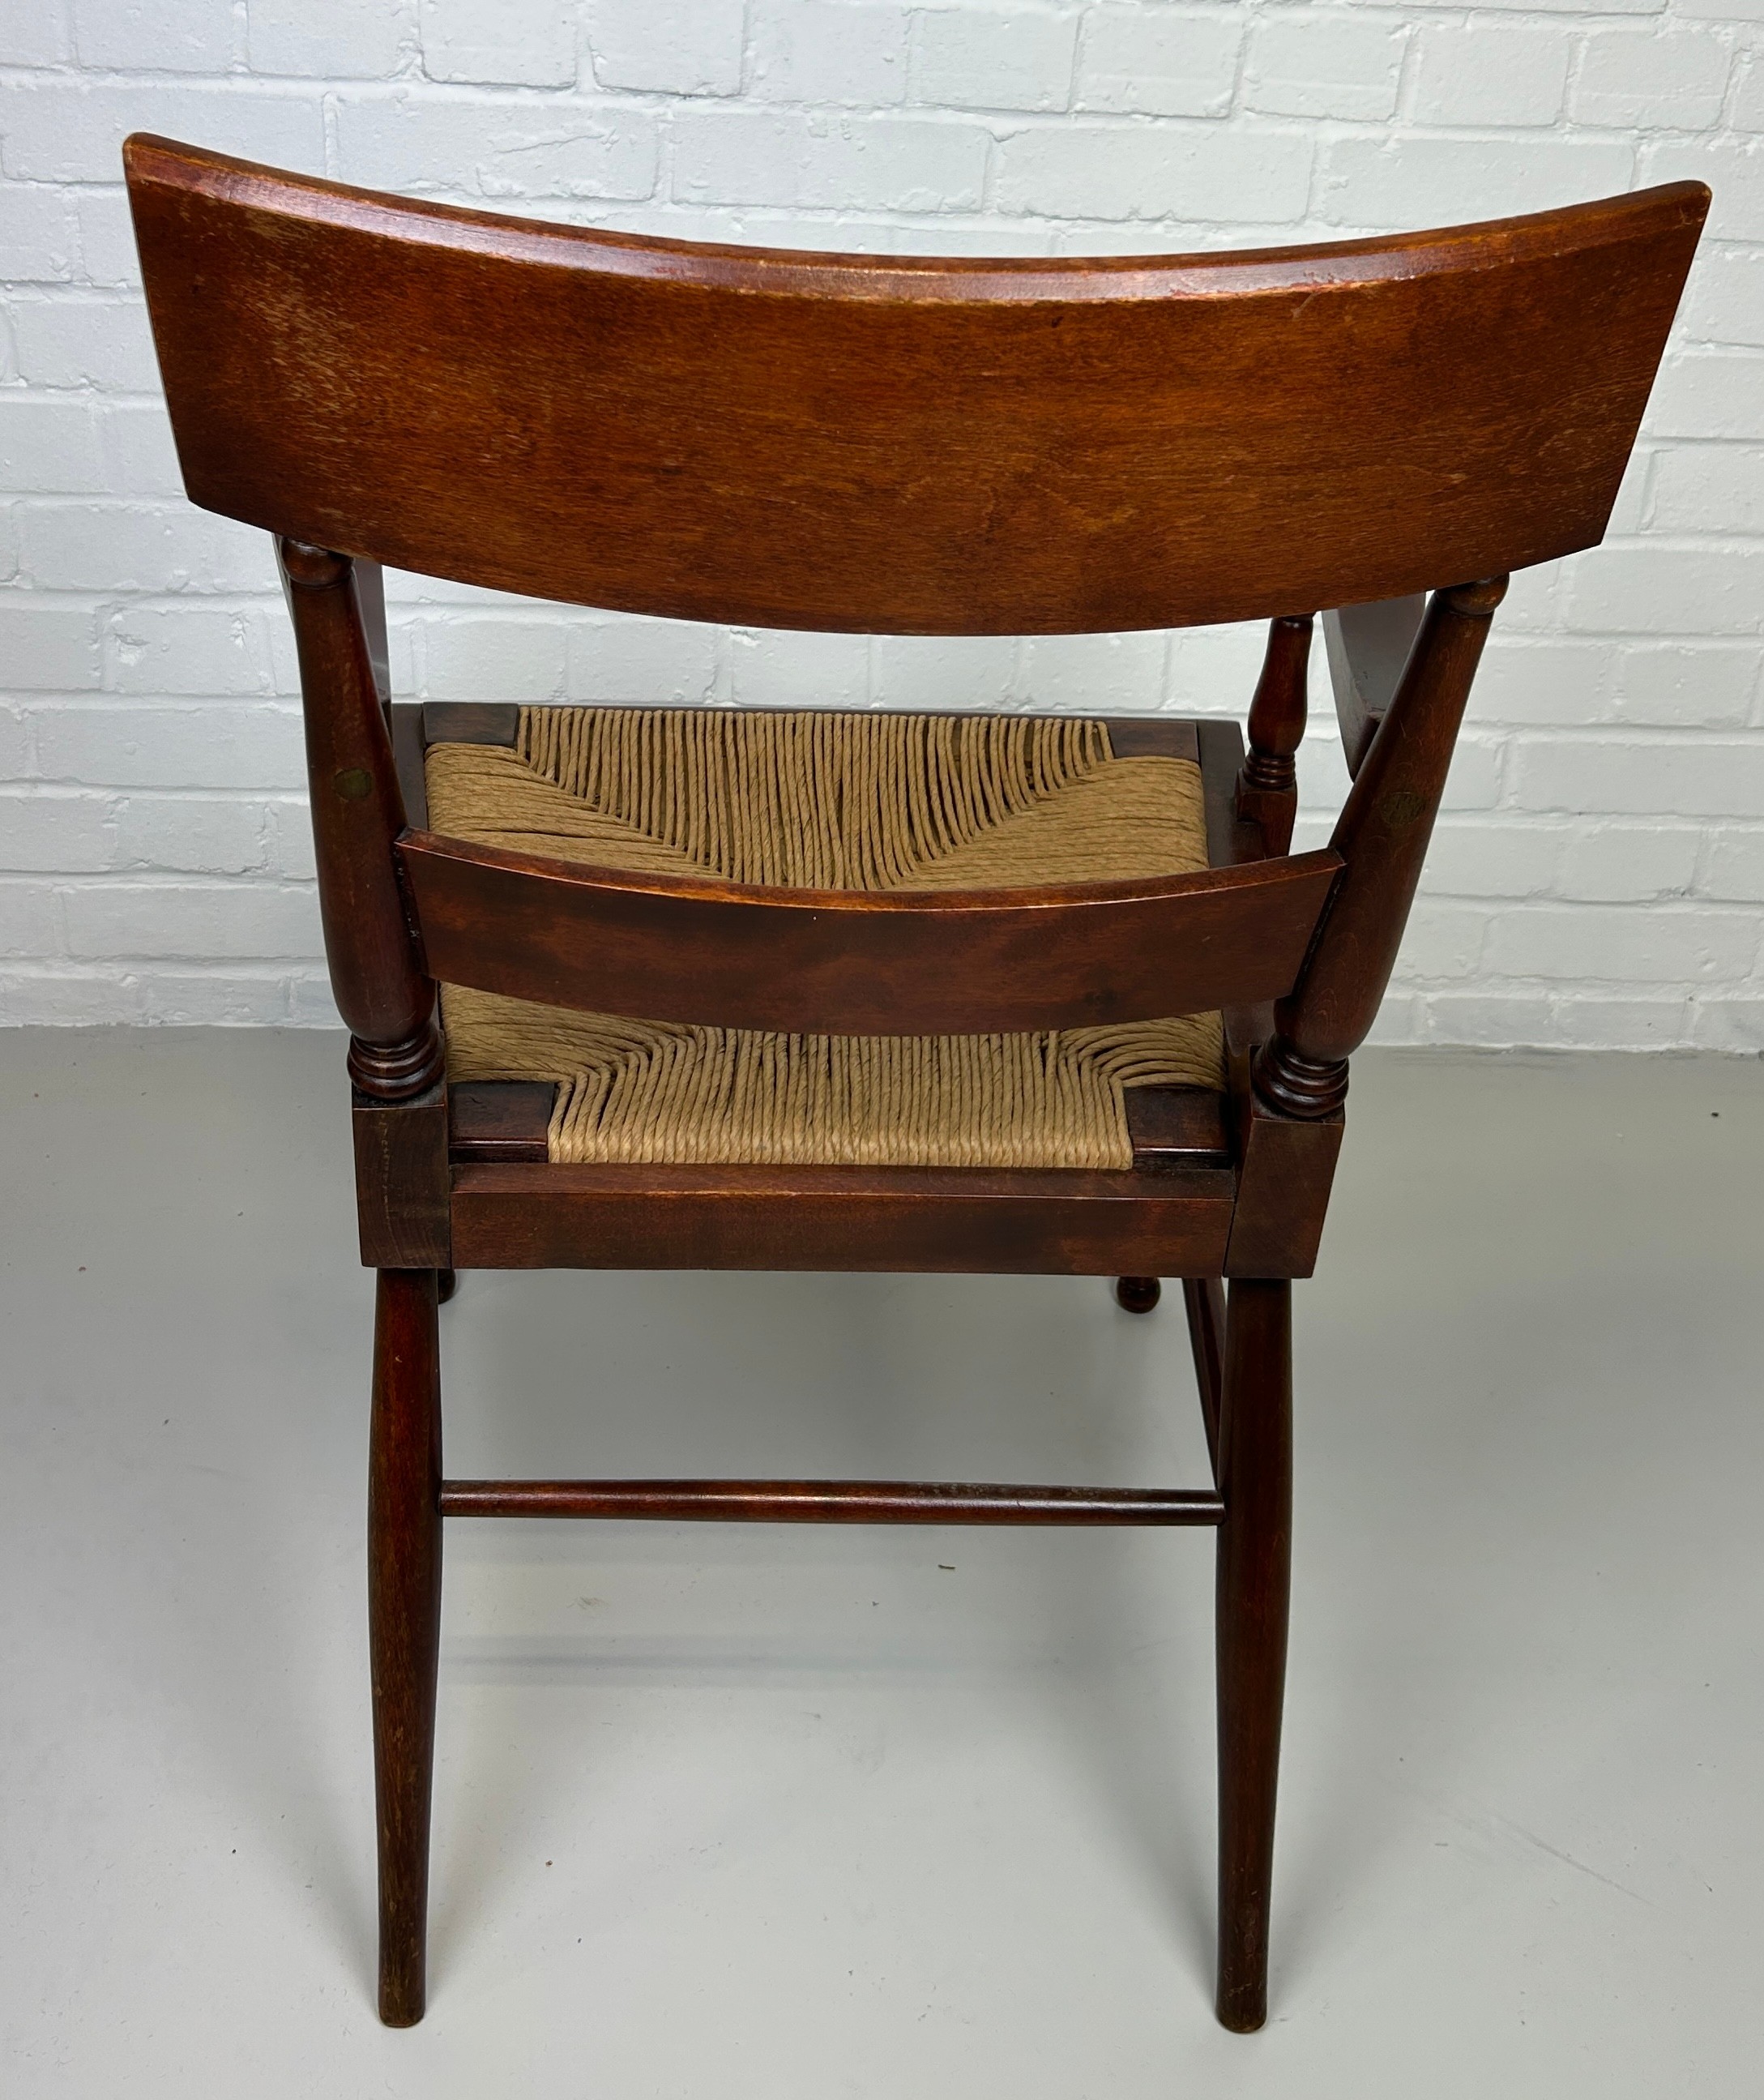 AN EARLY 20TH CENTURY ARMCHAIR OR DESK CHAIR, Flame mahogany with scroll arms and cane upholstered - Image 3 of 4